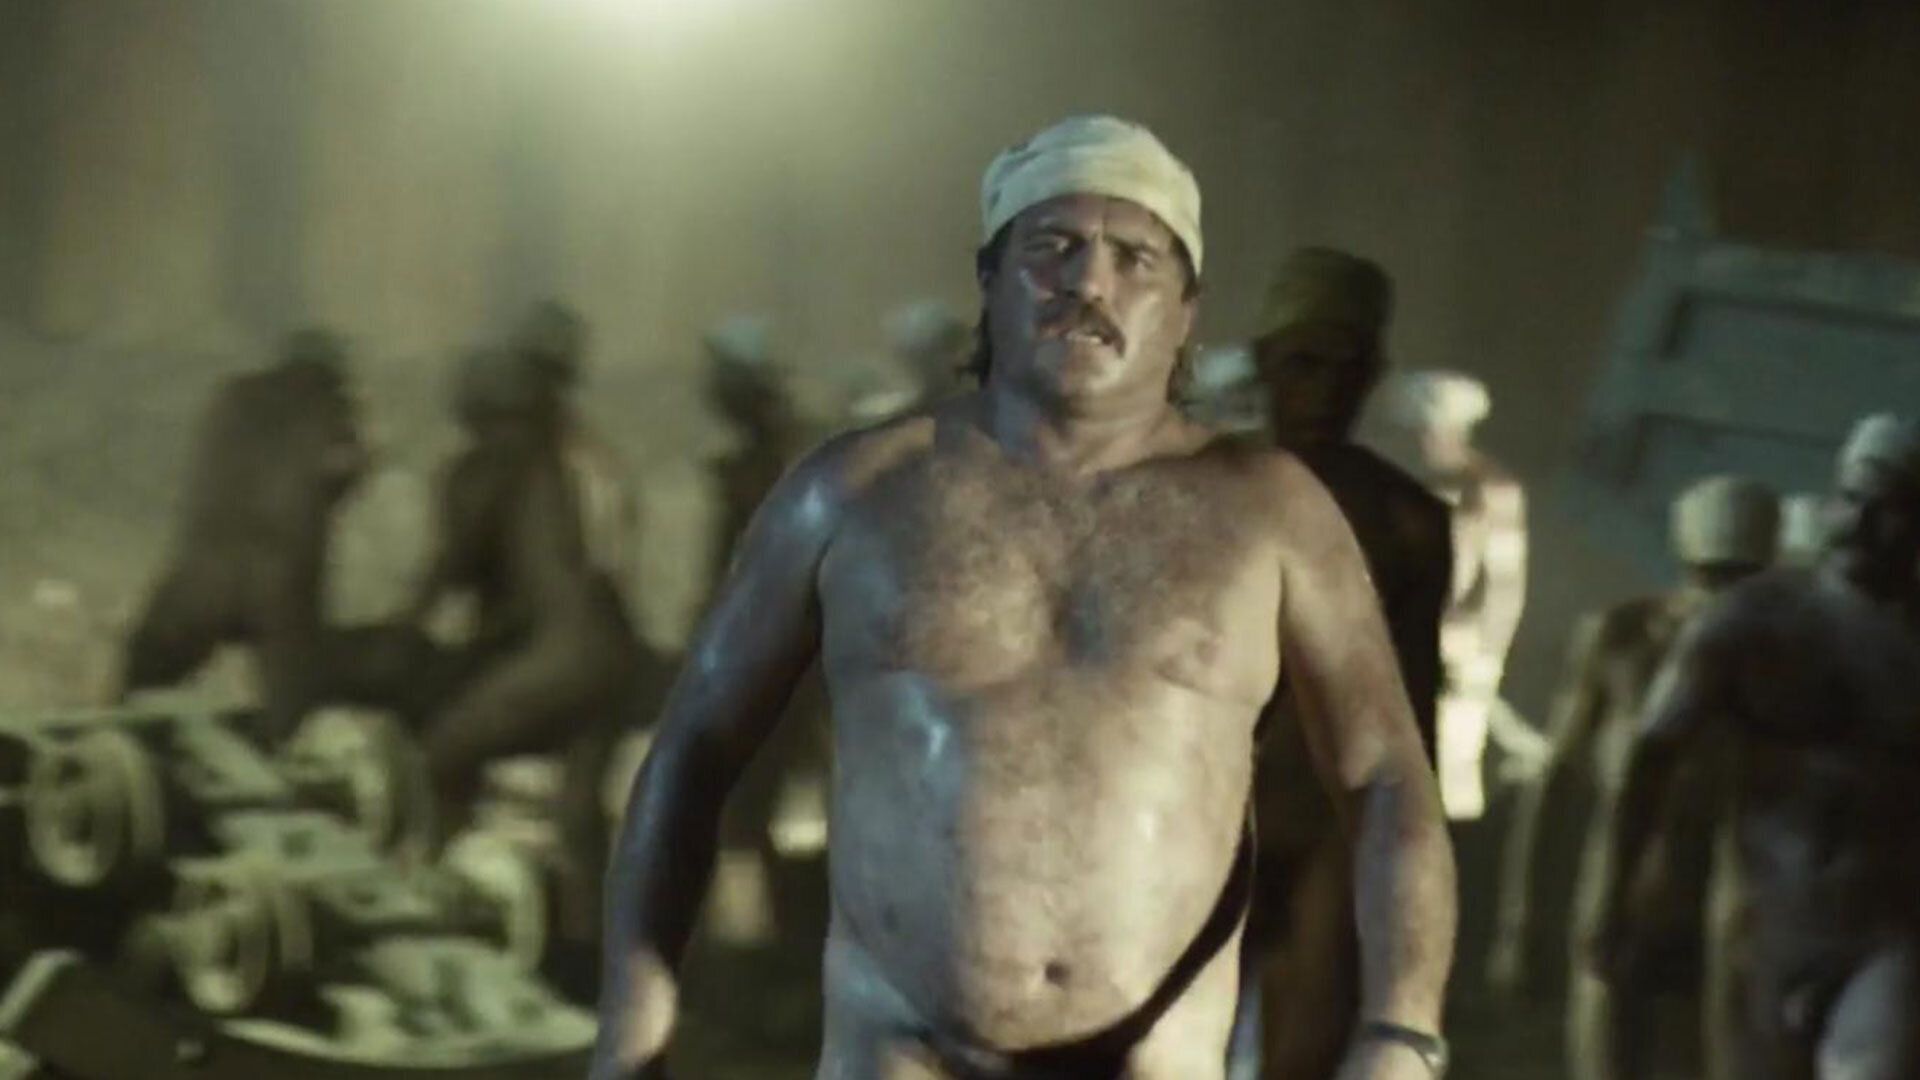 High Quality Chernobyl naked miners Blank Meme Template